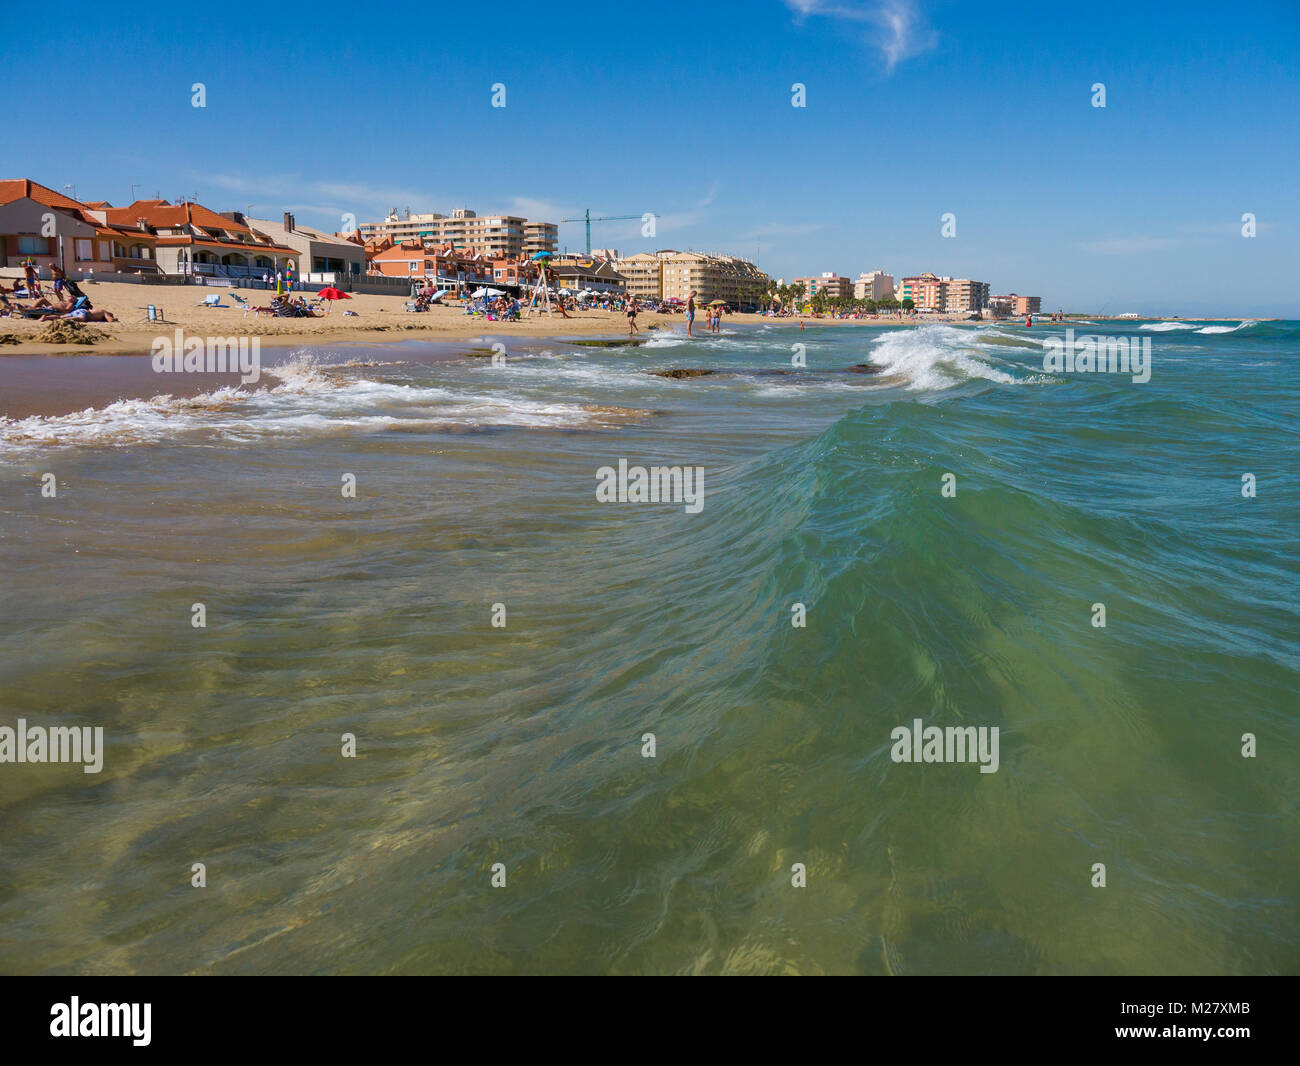 The beach and Mediterranean Sea at La Mata on the Costa Blanca. Torrevieja in the province of Alicante, Spain. Stock Photo